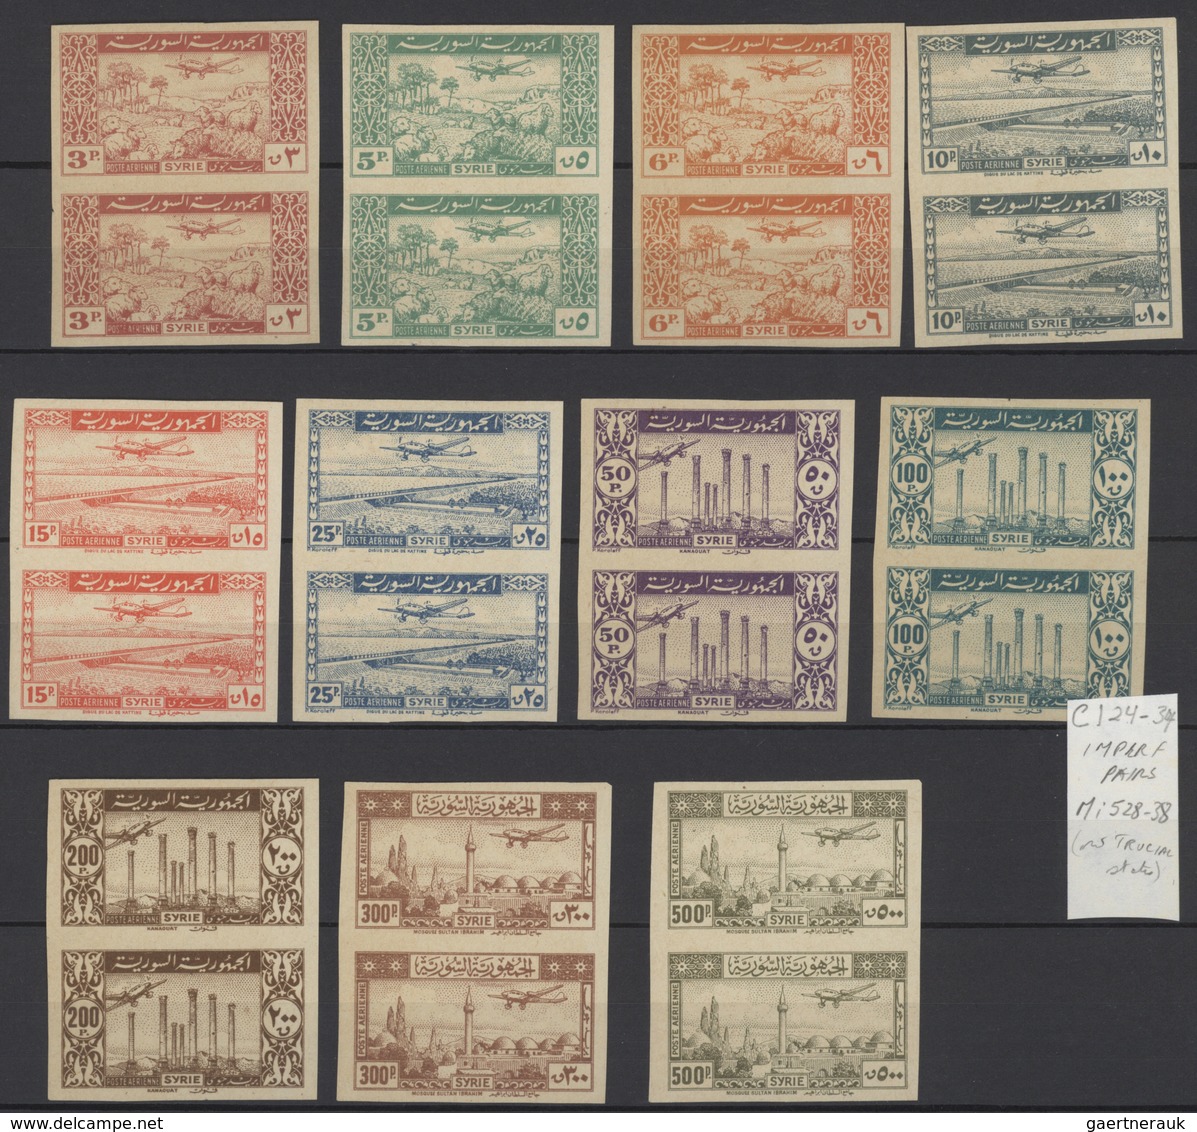 Syrien: 1930-50, Stock of imperf issues in large album including air mails, many imperfs in pairs, m